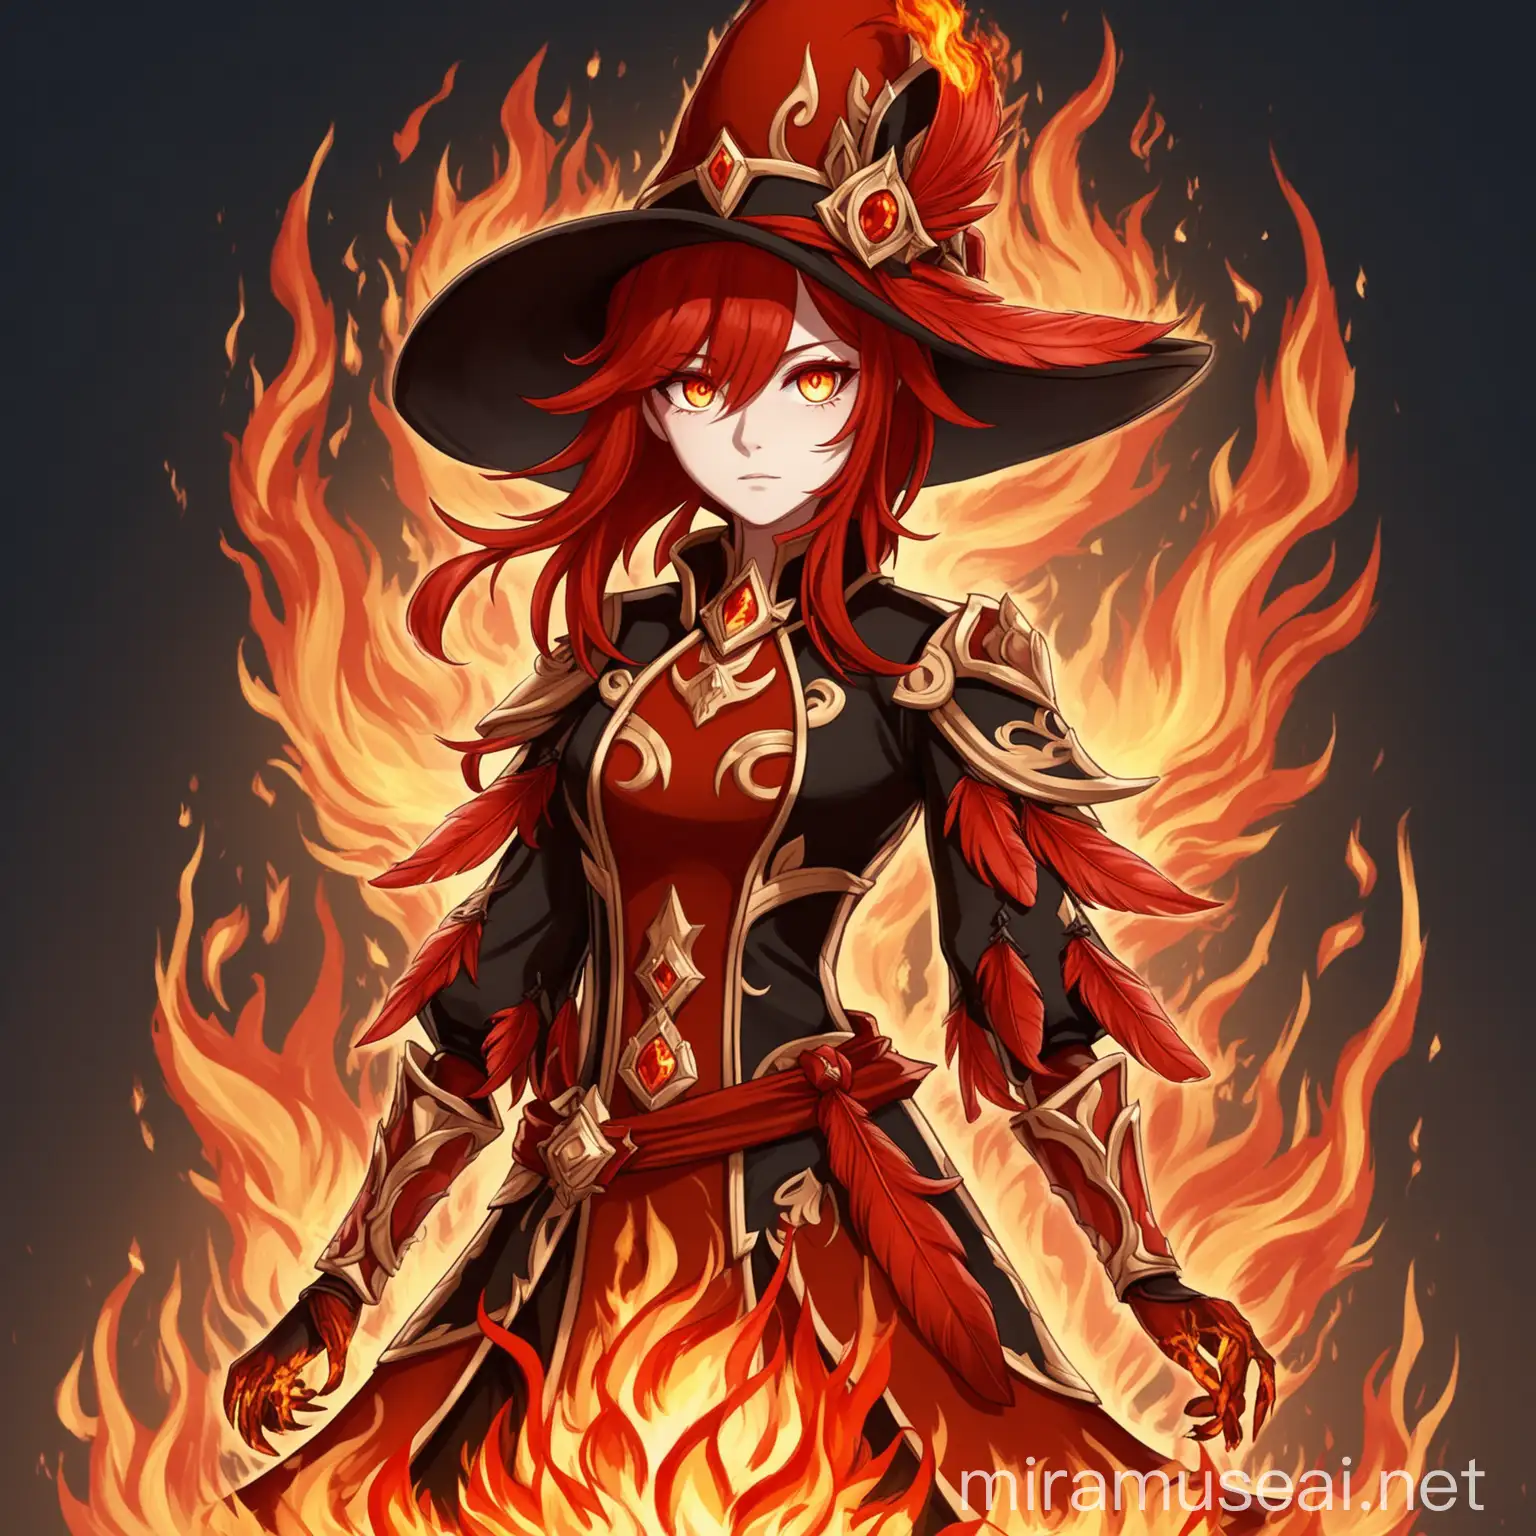 Tall Female Character with Red and Black Hat and Fiery Eyes